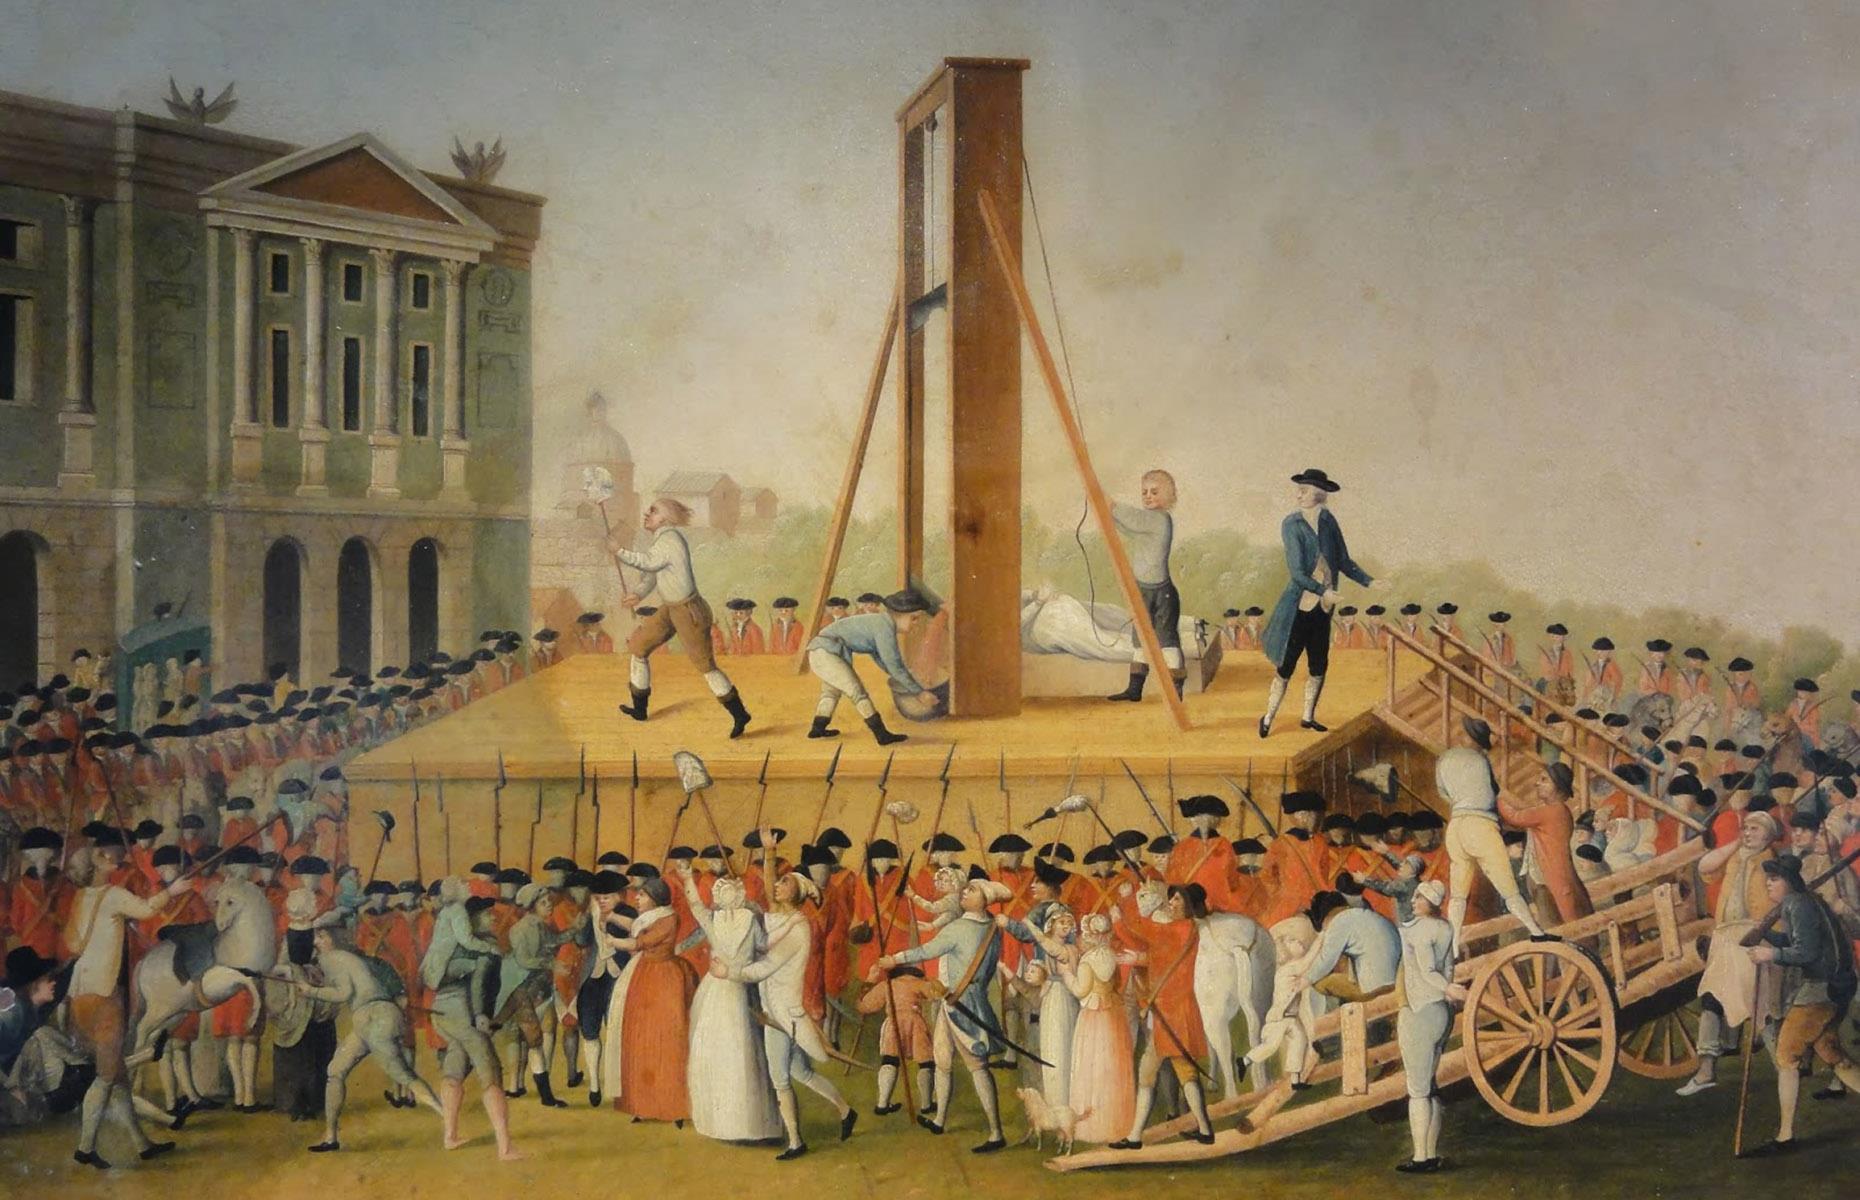 <p>The French Revolution, which started in 1789 and raged on for a decade, ultimately spelled the end for Marie Antoinette and Louis XVI.</p>  <p>The royal couple were arrested in August 1792 after the storming of the Tuileries Palace in Paris, and the National Assembly declared the monarchy to be abolished shortly after.</p>  <p>A few months later, Louis was convicted of treason by the National Convention and was executed by guillotine on January 21, 1793, in Paris.</p>  <p>Marie Antoinette suffered an equally grim fate that stood in direct contrast to the glamor and decadence that had once surrounded her. Found guilty of charges including high treason against the French Republic, she was executed in Paris by guillotine on October 16, 1793.</p>  <p><strong>From one doomed royal dynasty to another: discover <a href="https://www.lovemoney.com/galleries/119944/the-rise-and-fall-of-russias-ruling-house-of-romanov">the rise and fall of the Romanovs</a></strong></p>